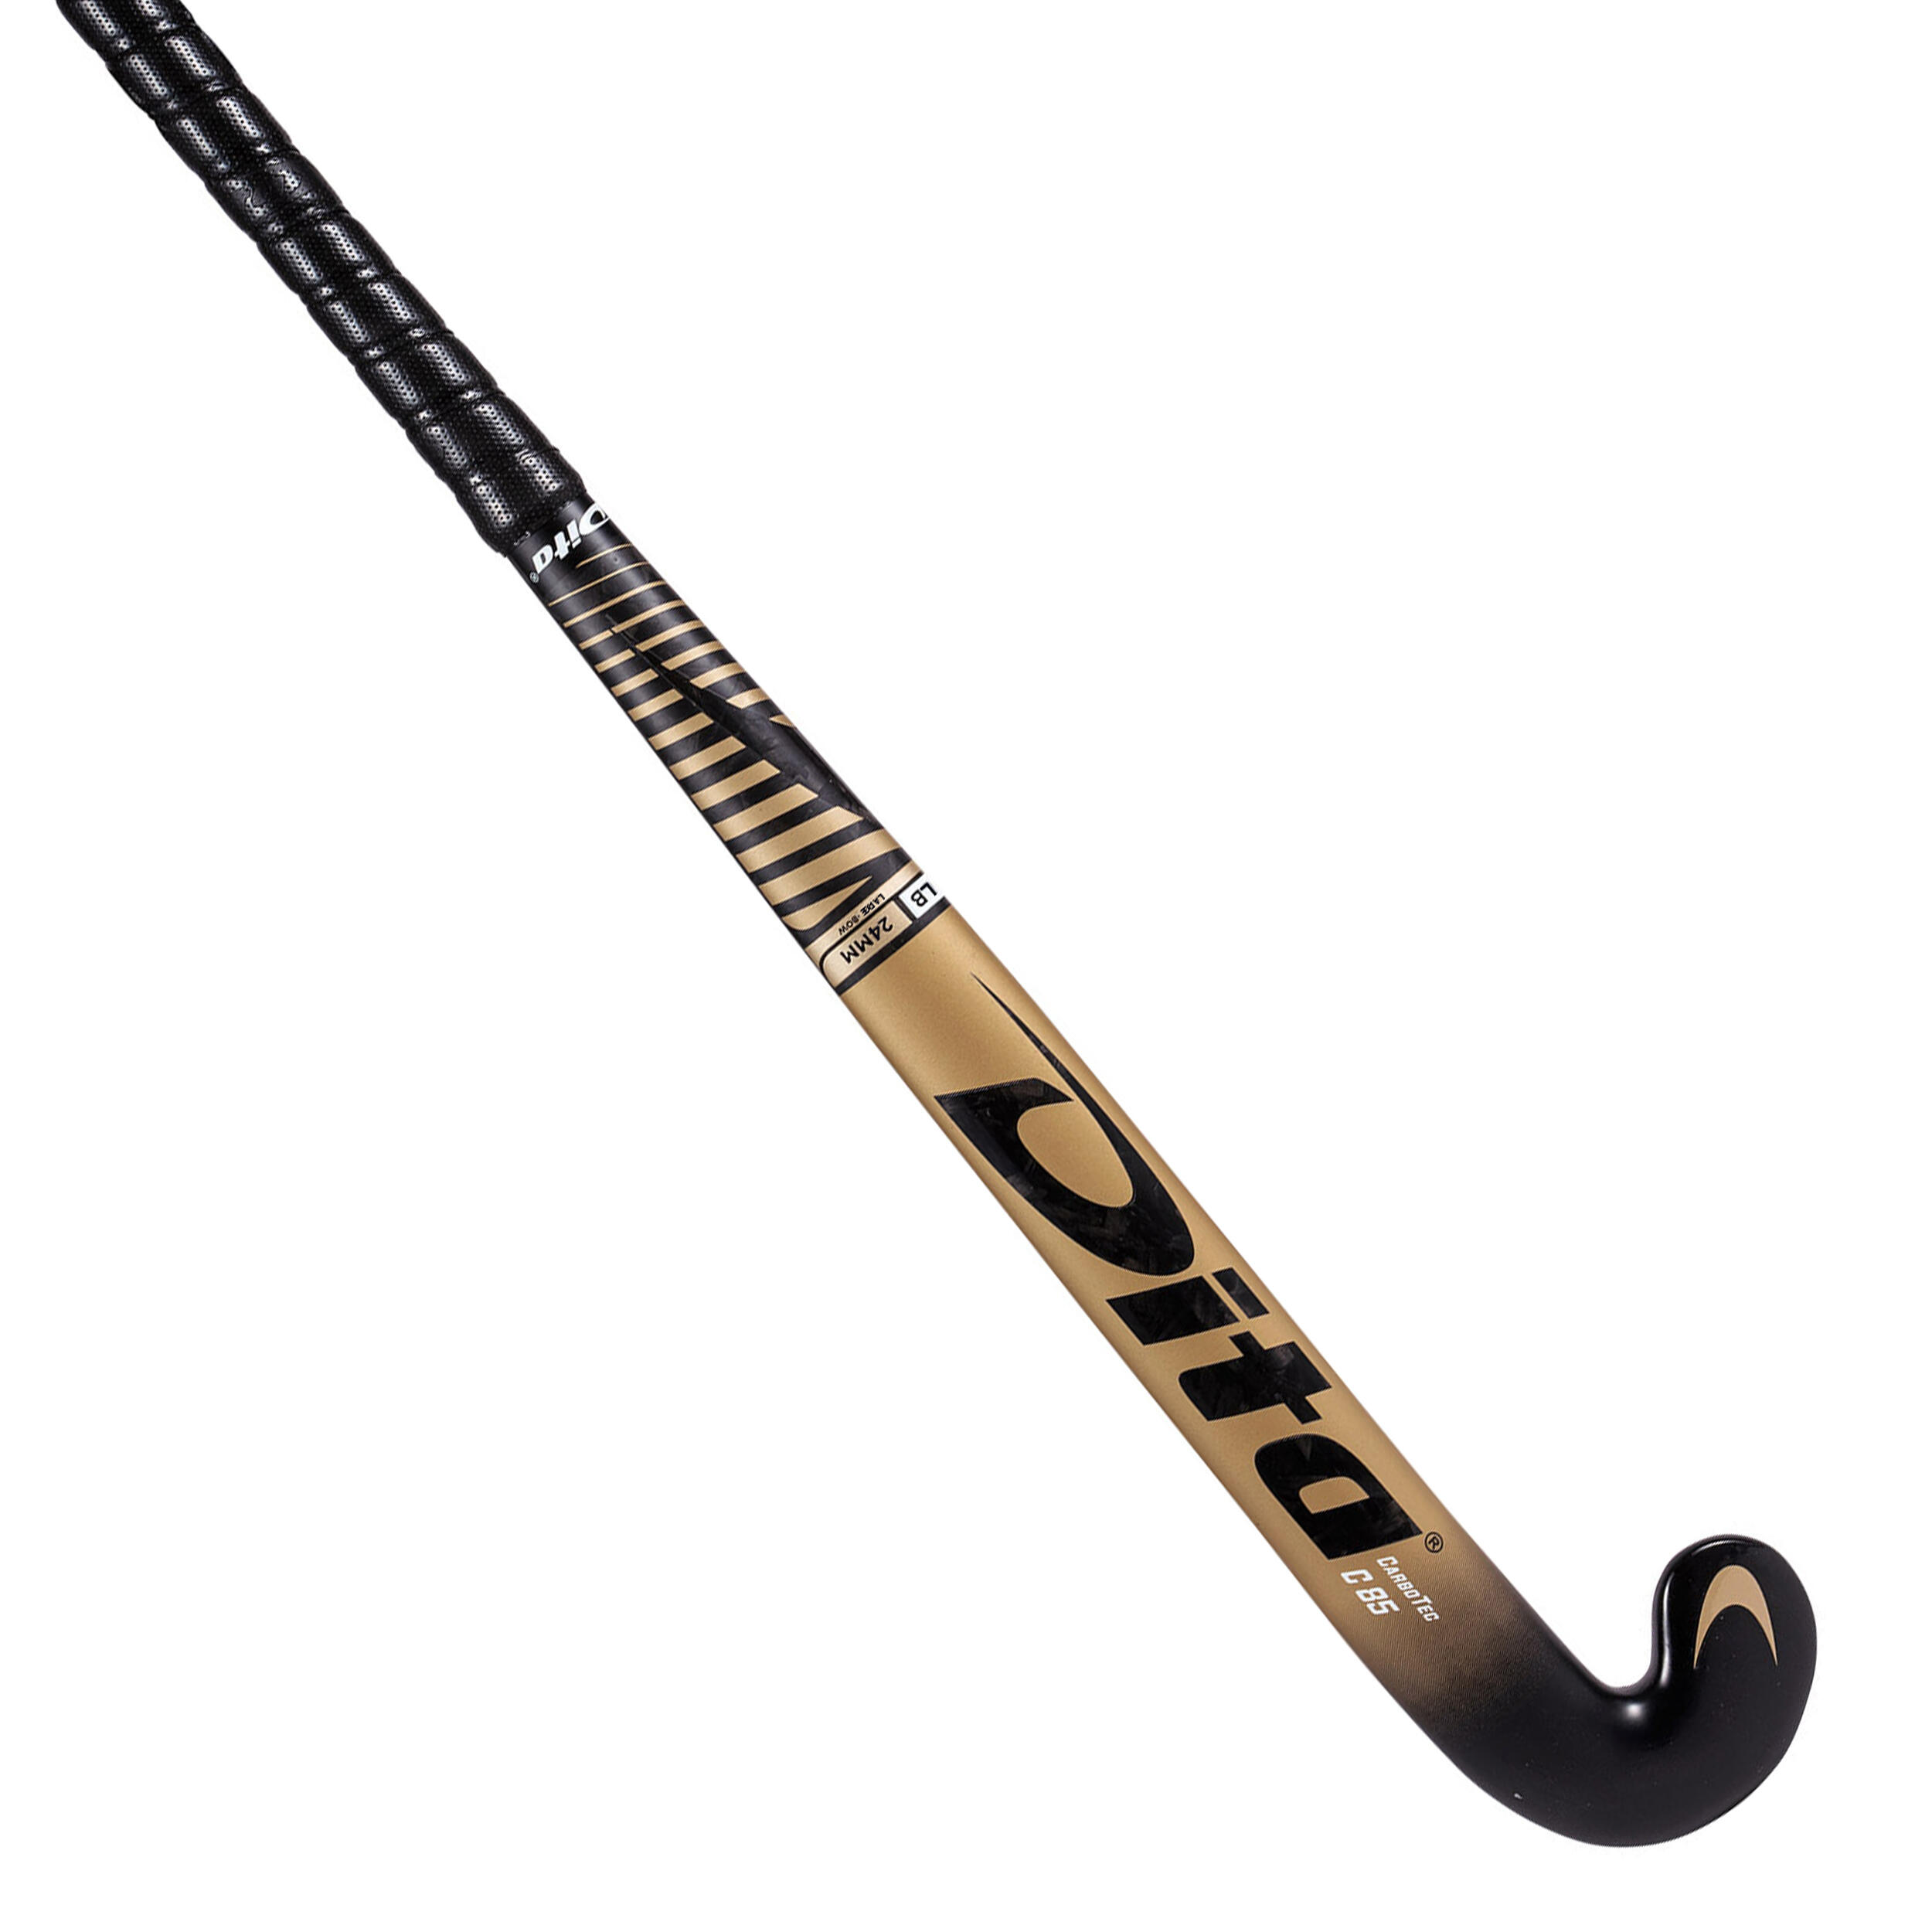 DITA Adult Advanced 85 % Carbon Low Bow Field Hockey Stick CarboTec C85 - Gold/Black